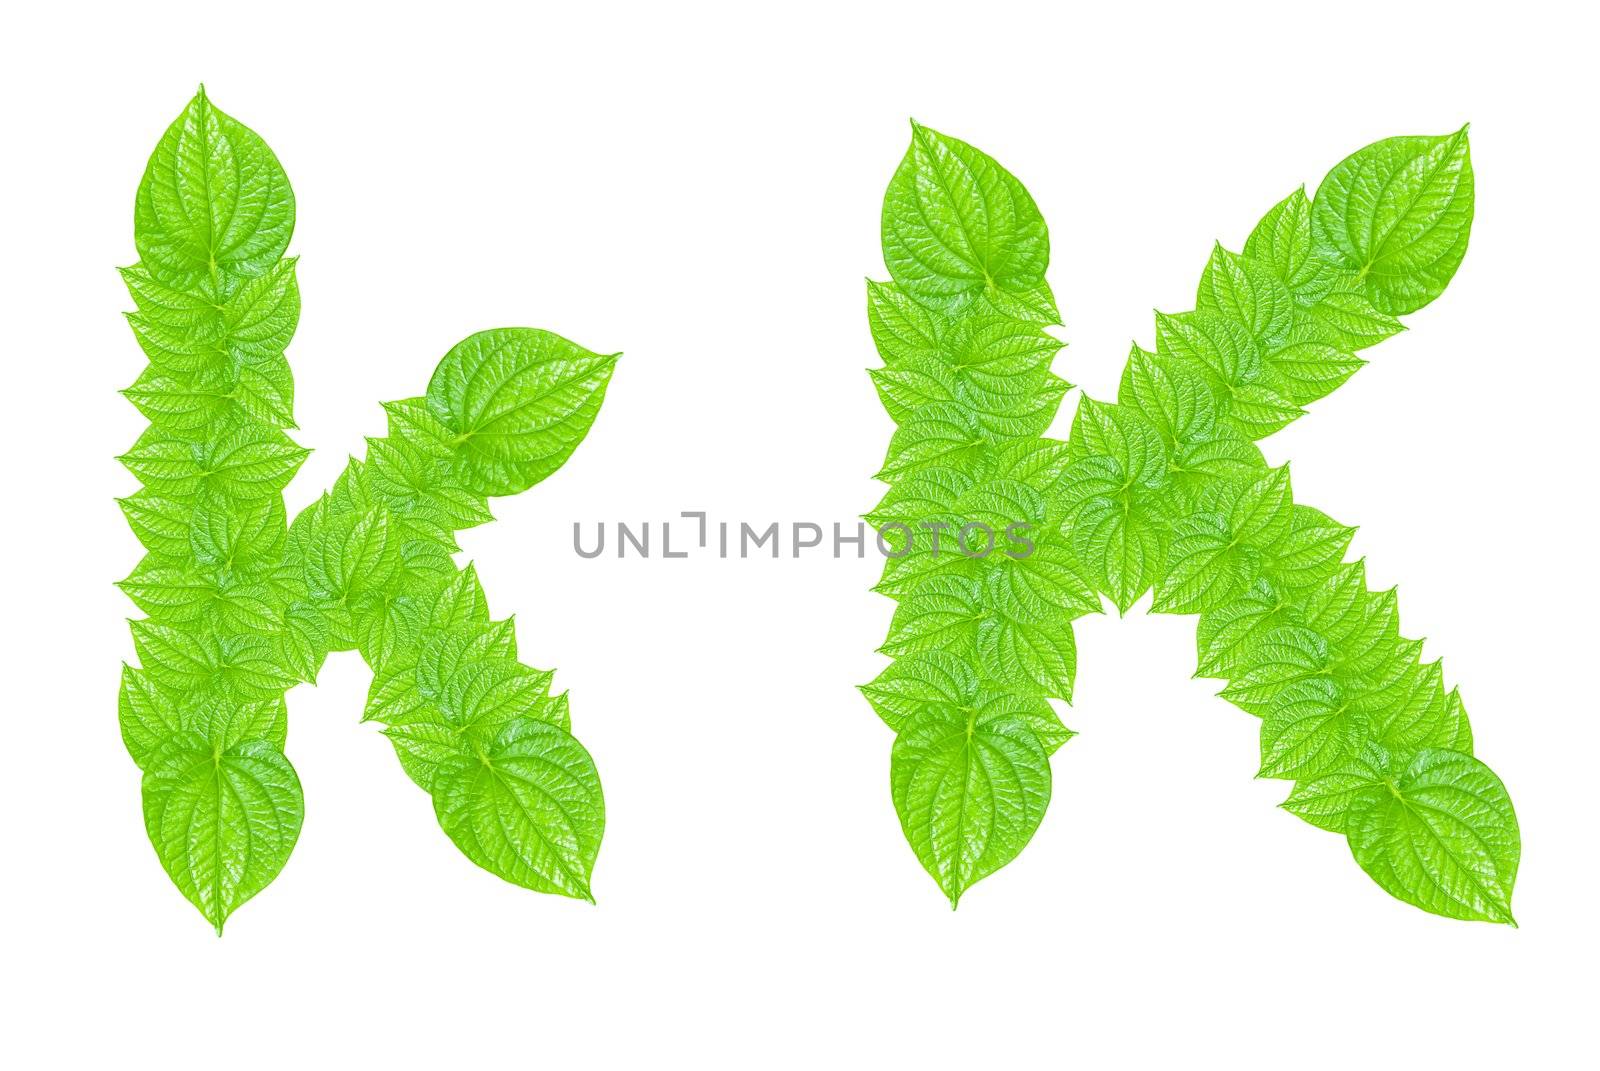 English alphabet made from green leafs with letter K in small capital and large capital letter